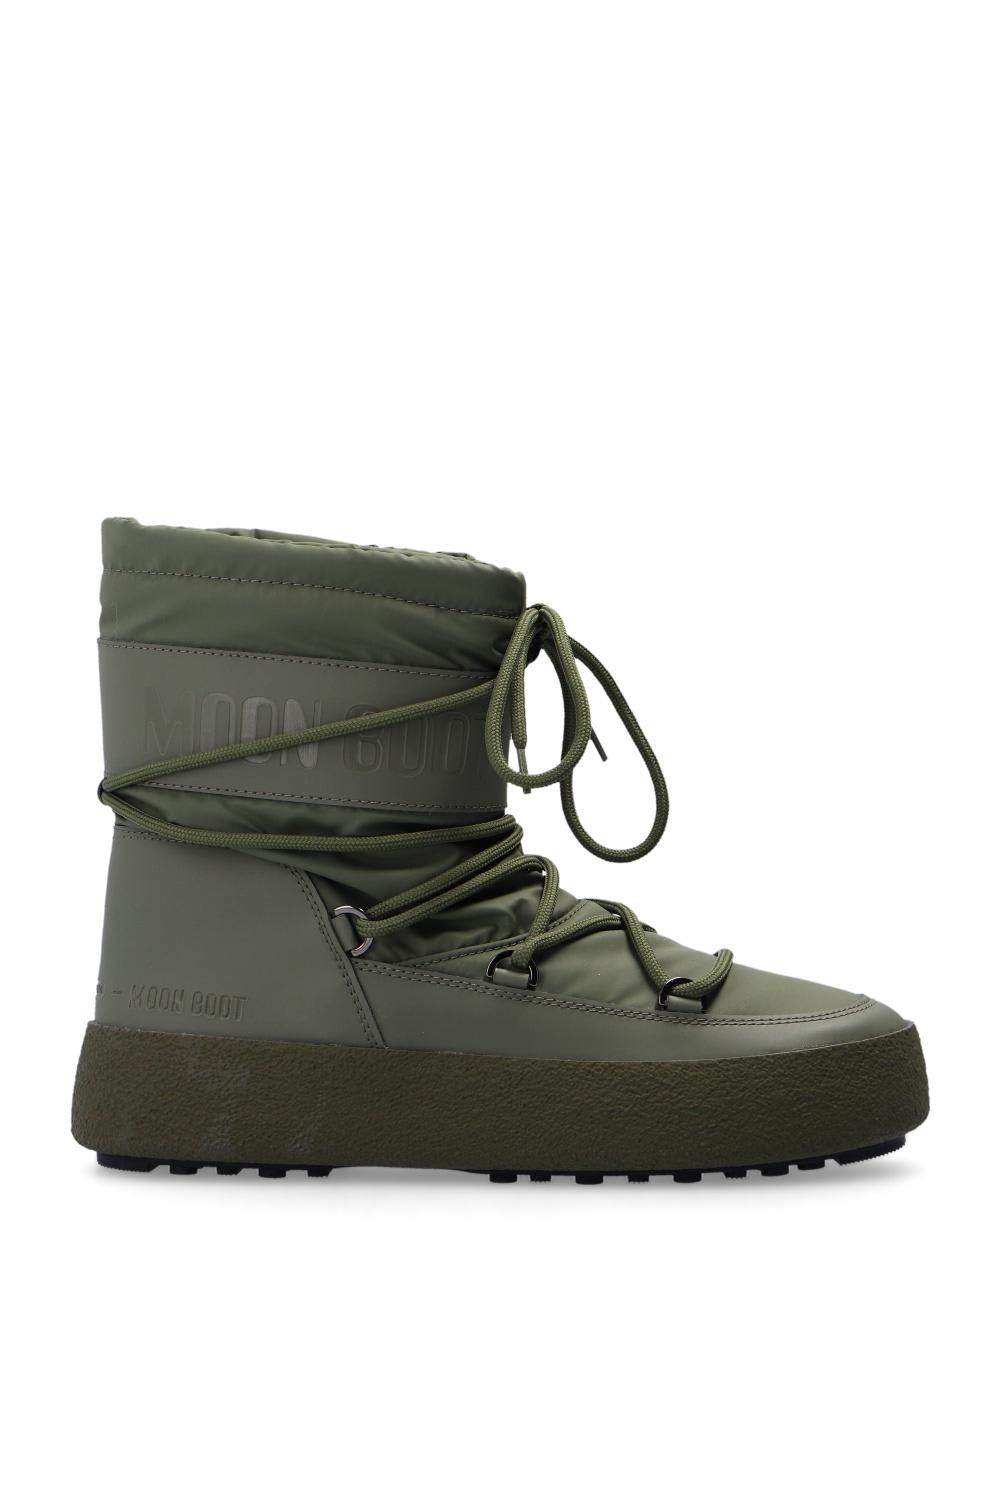 Moon Boot Mtrack Snow Boots In Green